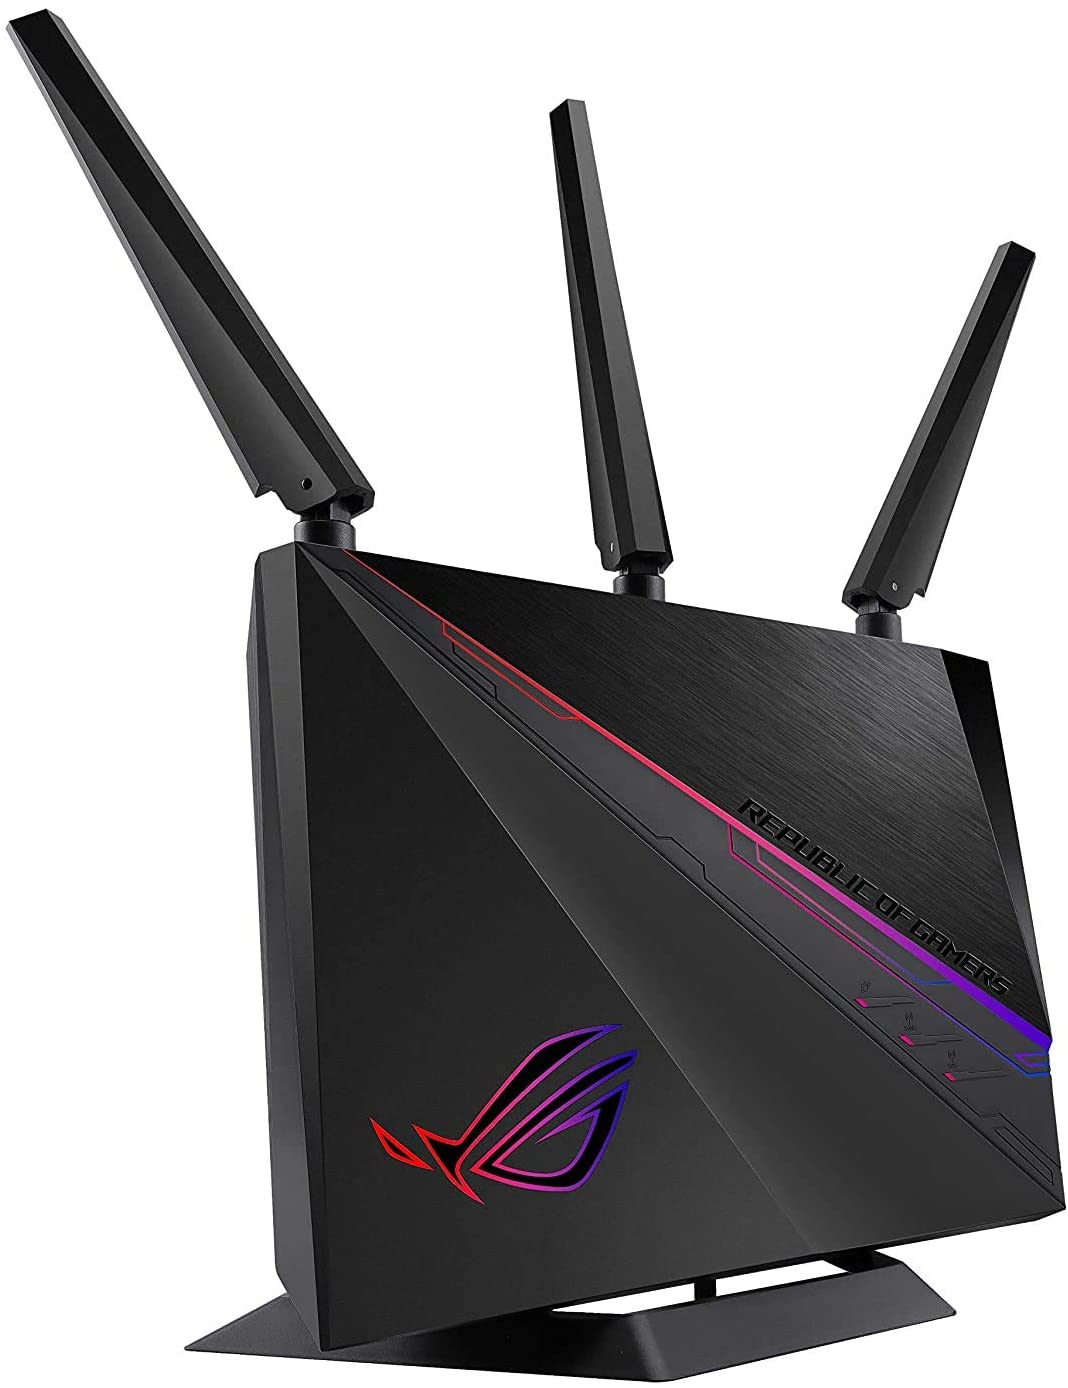 Amazon.com: ASUS ROG Rapture WiFi Gaming Router (GT-AC2900) $91.00